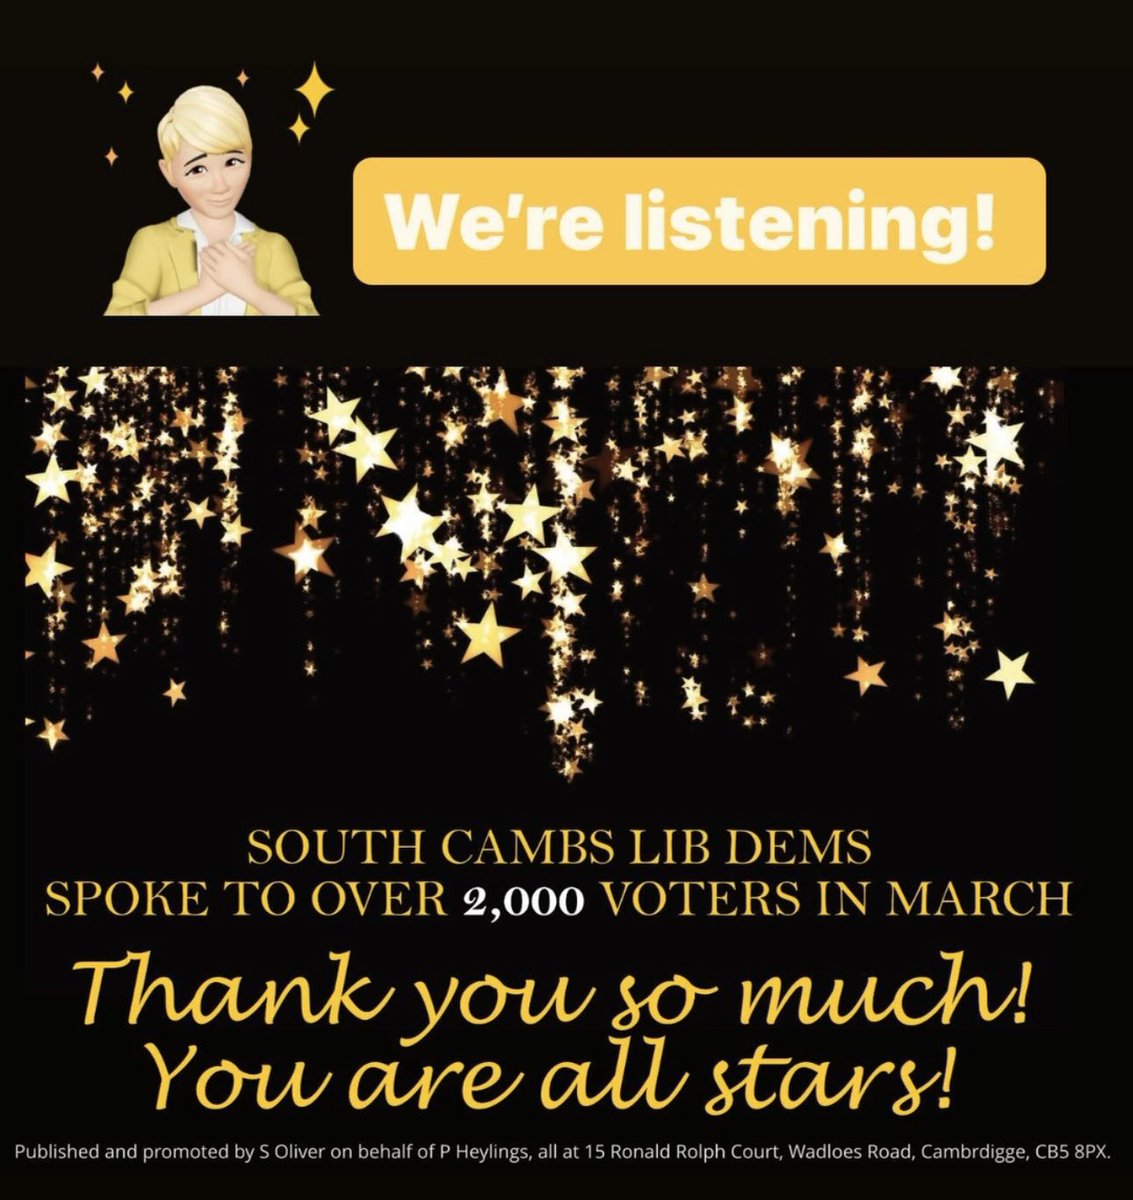 We’re listening! Thank you for taking the time to talk to us 👨‍👩‍👧 #nottakingyouforgranted We spoke to over 1,000 residents in #SouthCambridgeshire in January and February and now over 2,000 residents in March 🌟 Lots more to do! Say Hello 👋when you see us in your neighbourhood.